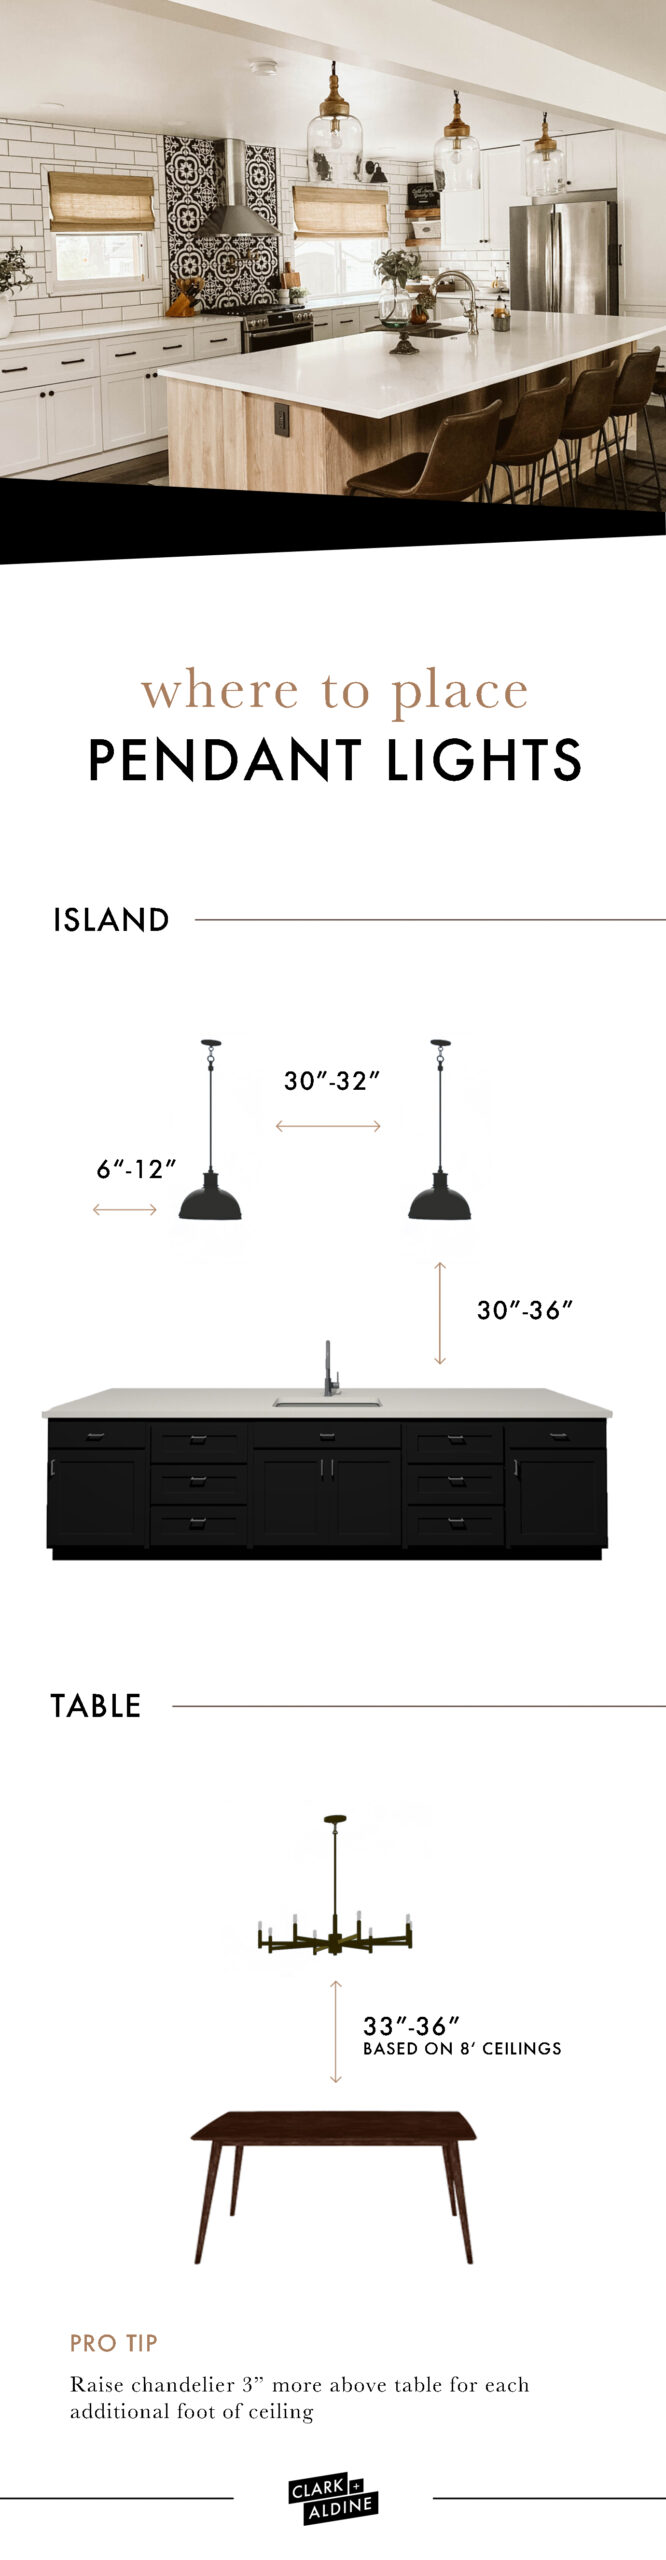 Where to Place Pendant Lights